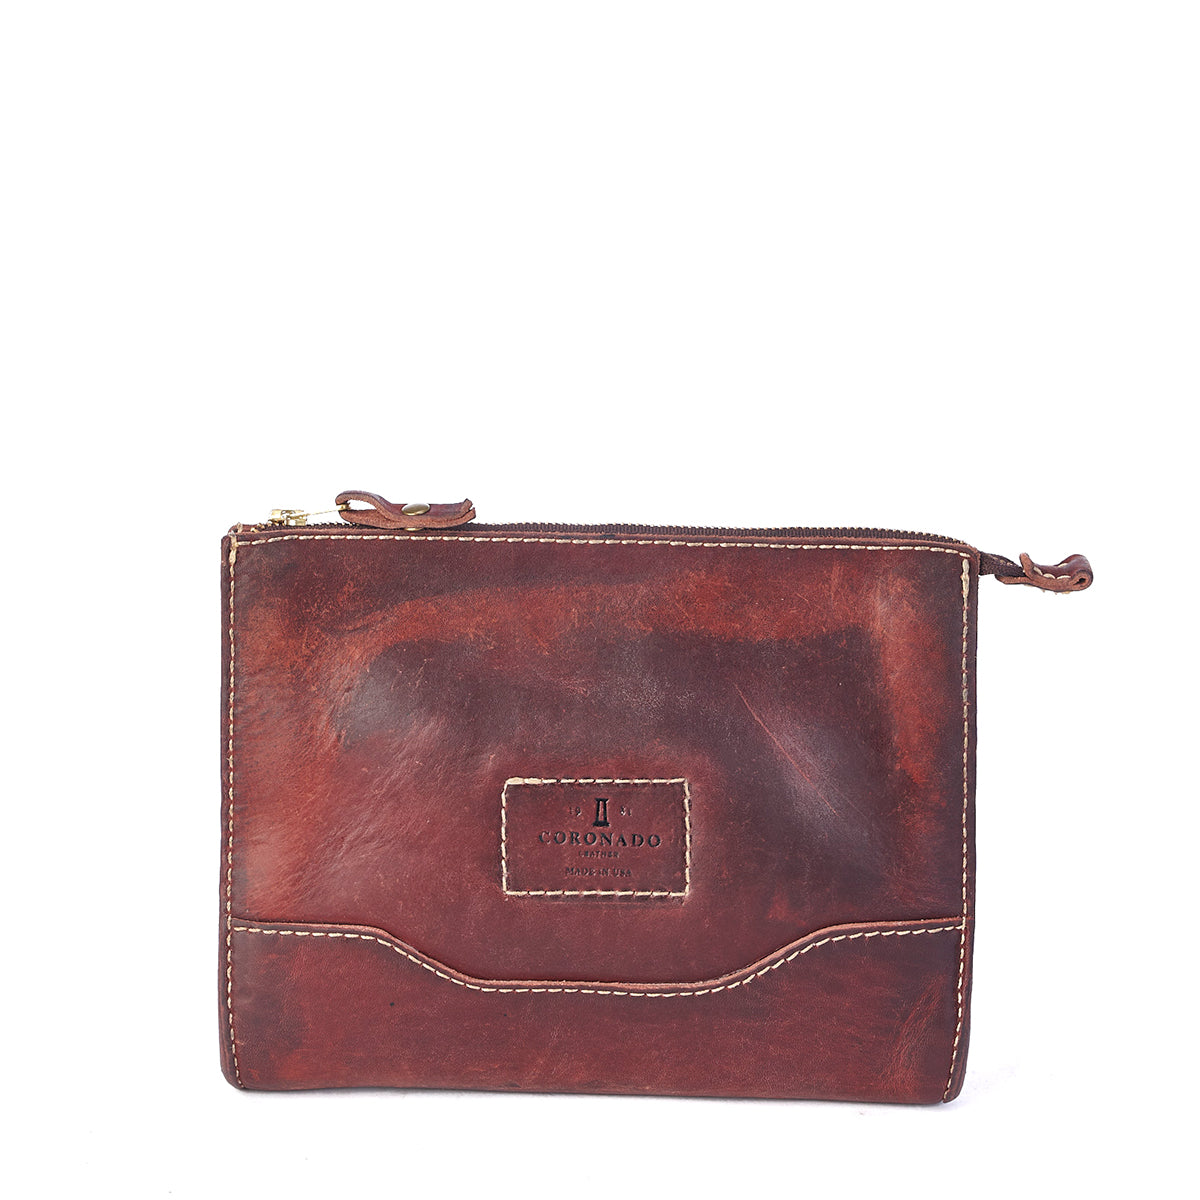 Stone-Washed Utility Pouch No.194 (Russet LE)